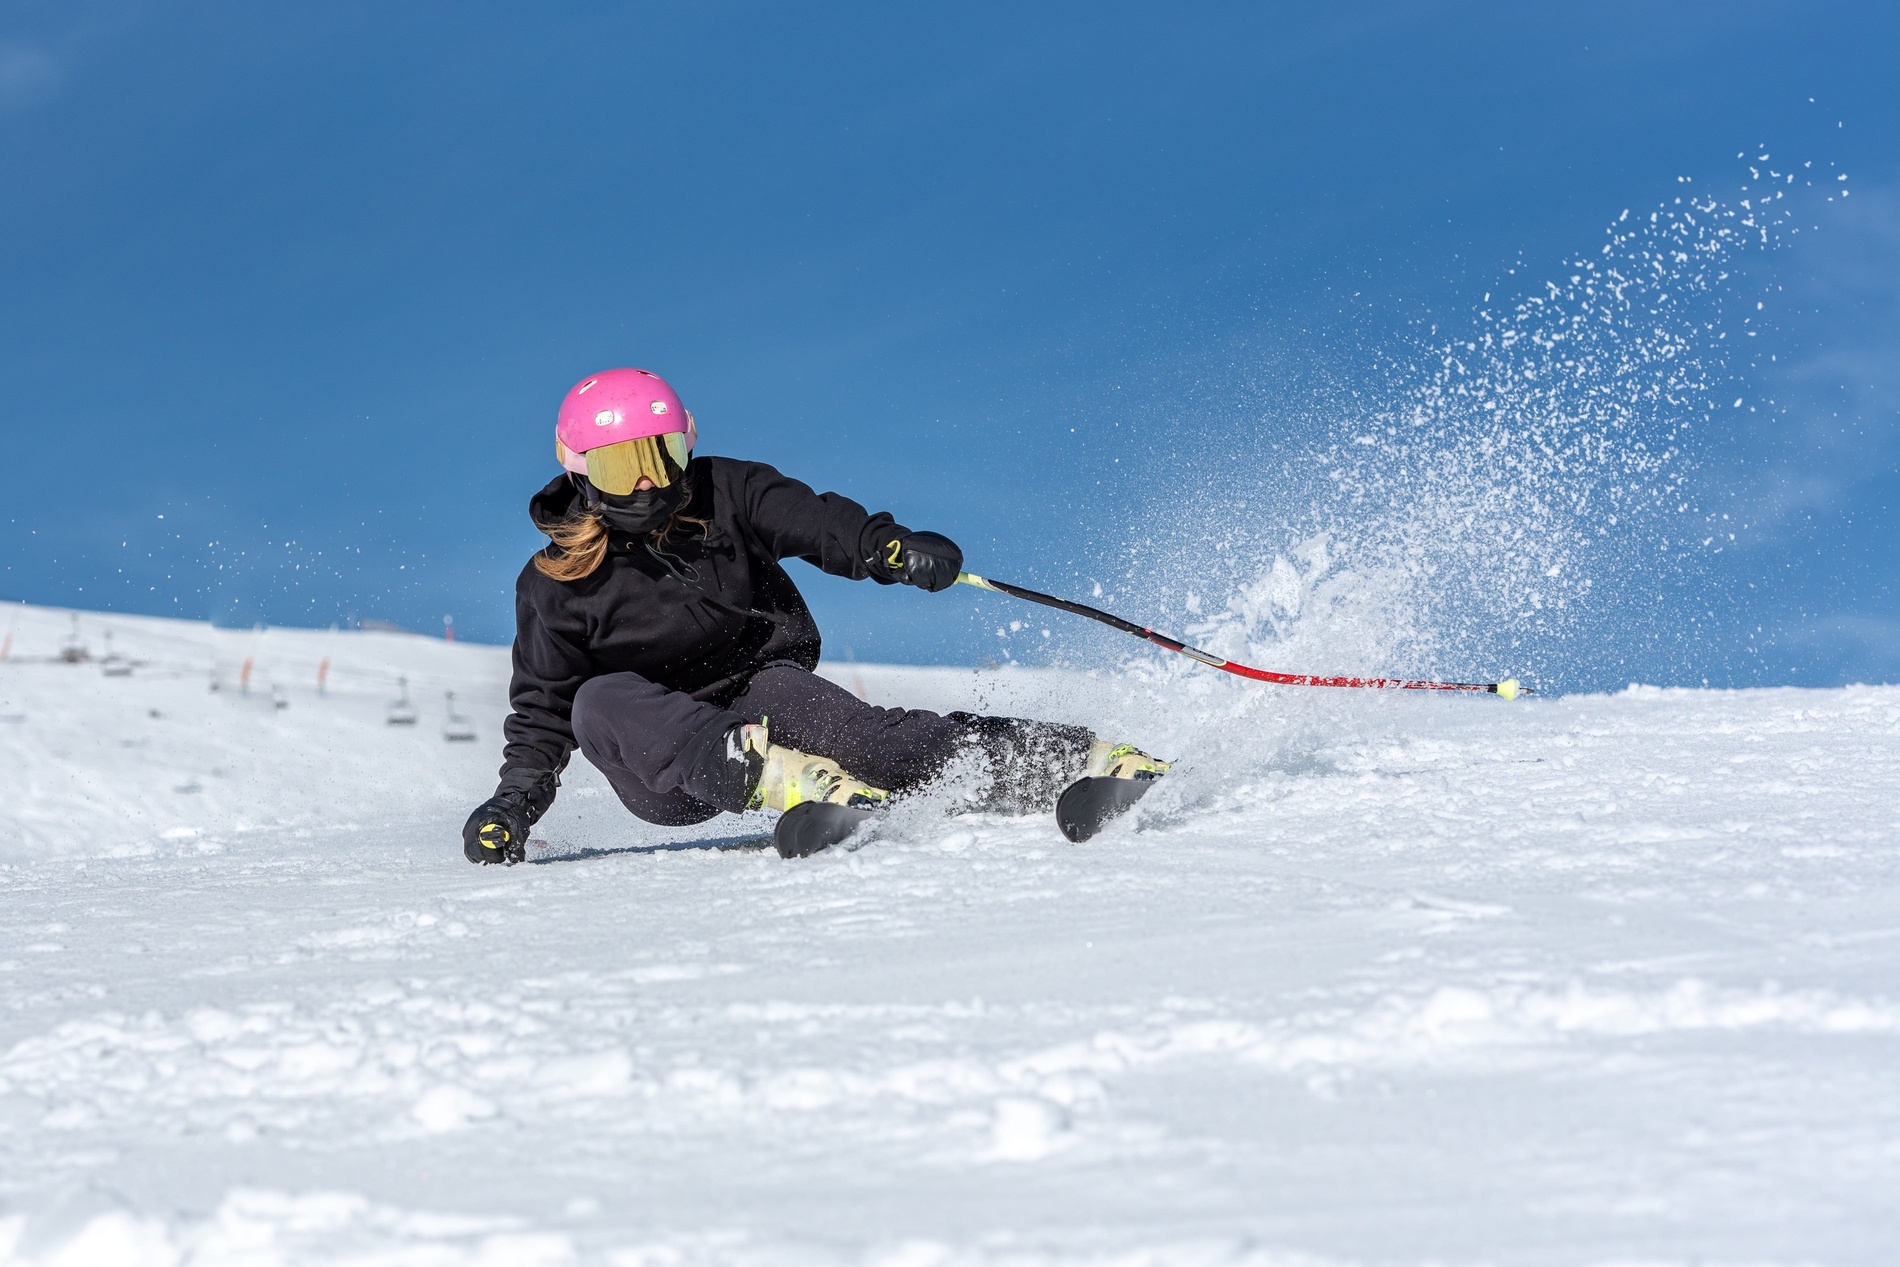 a woman wearing a pink helmet is skiing down a snowy slope